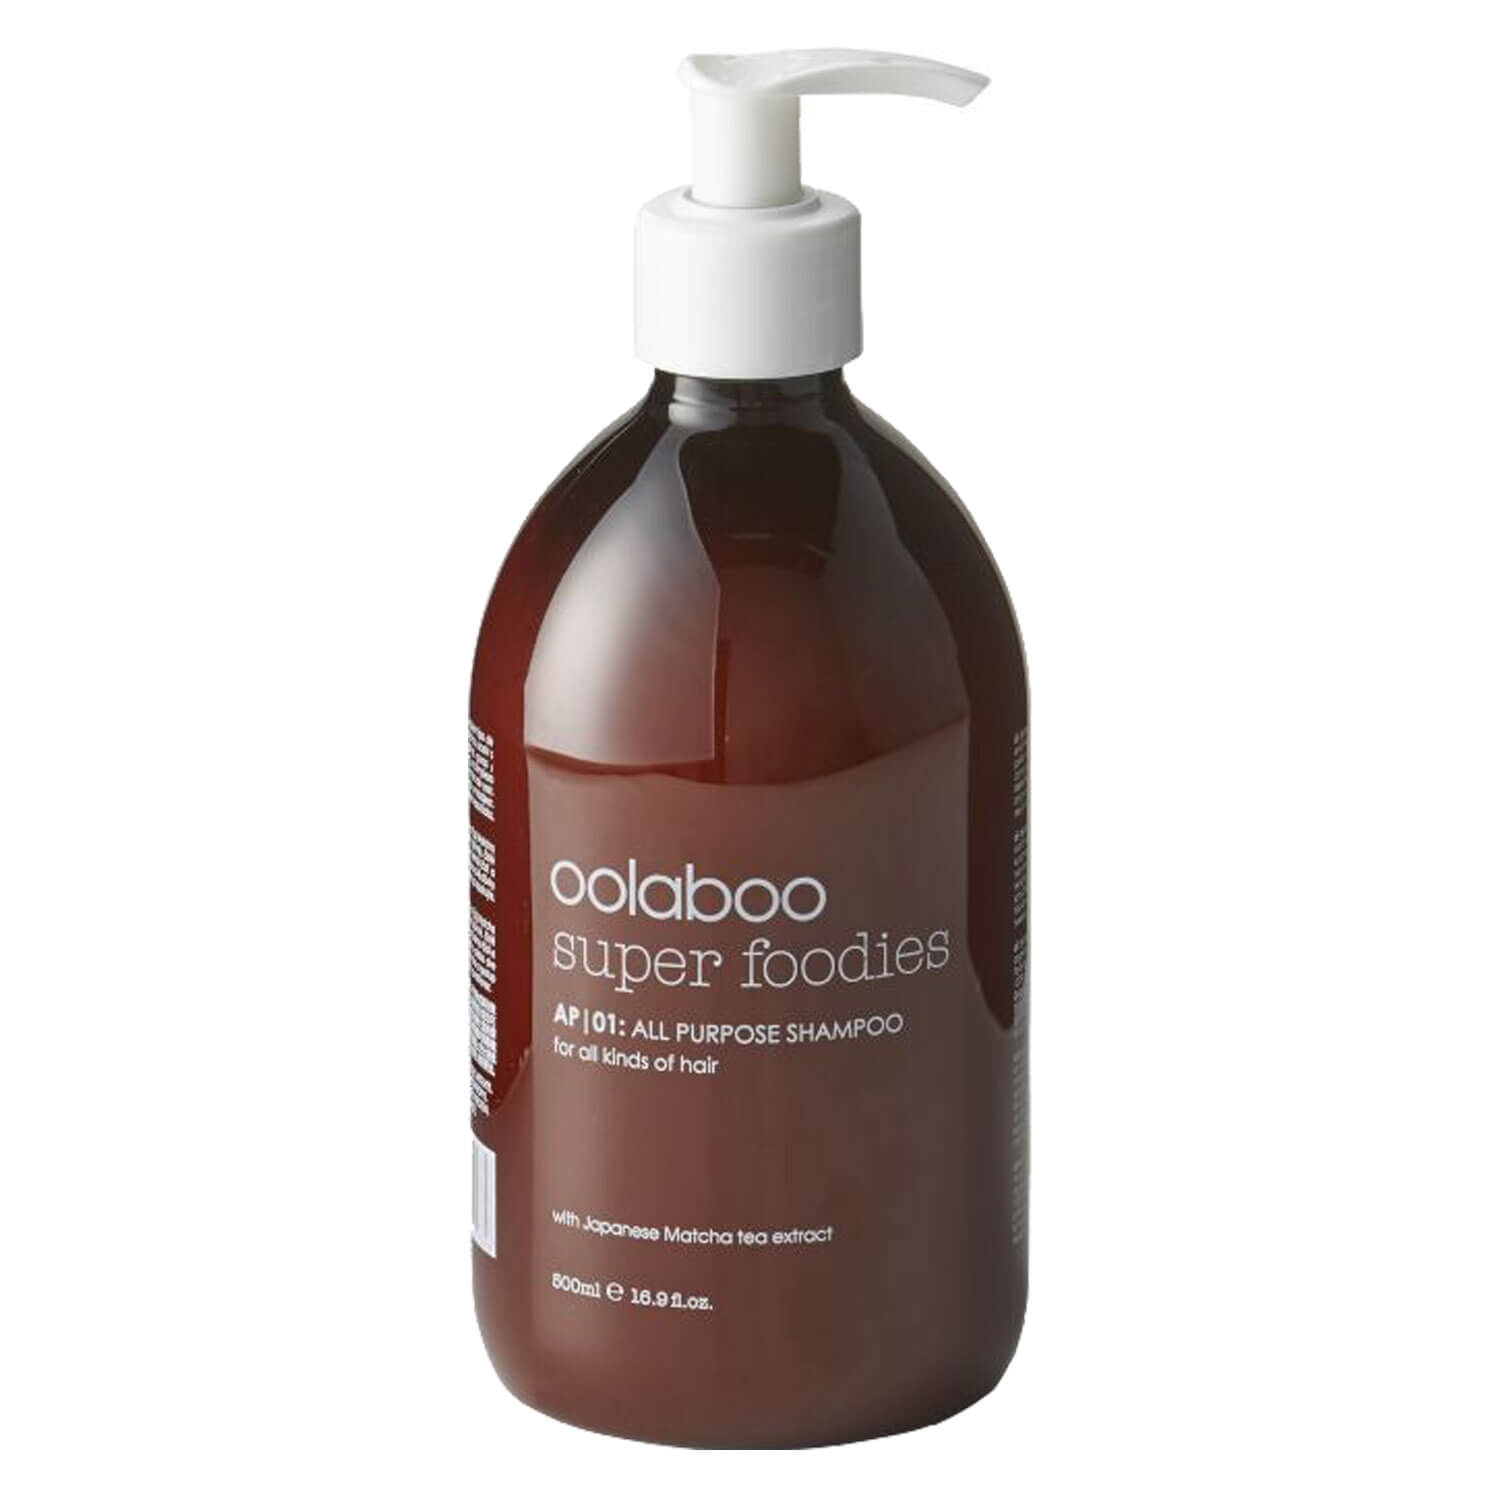 Product image from super foodies - all purpose shampoo